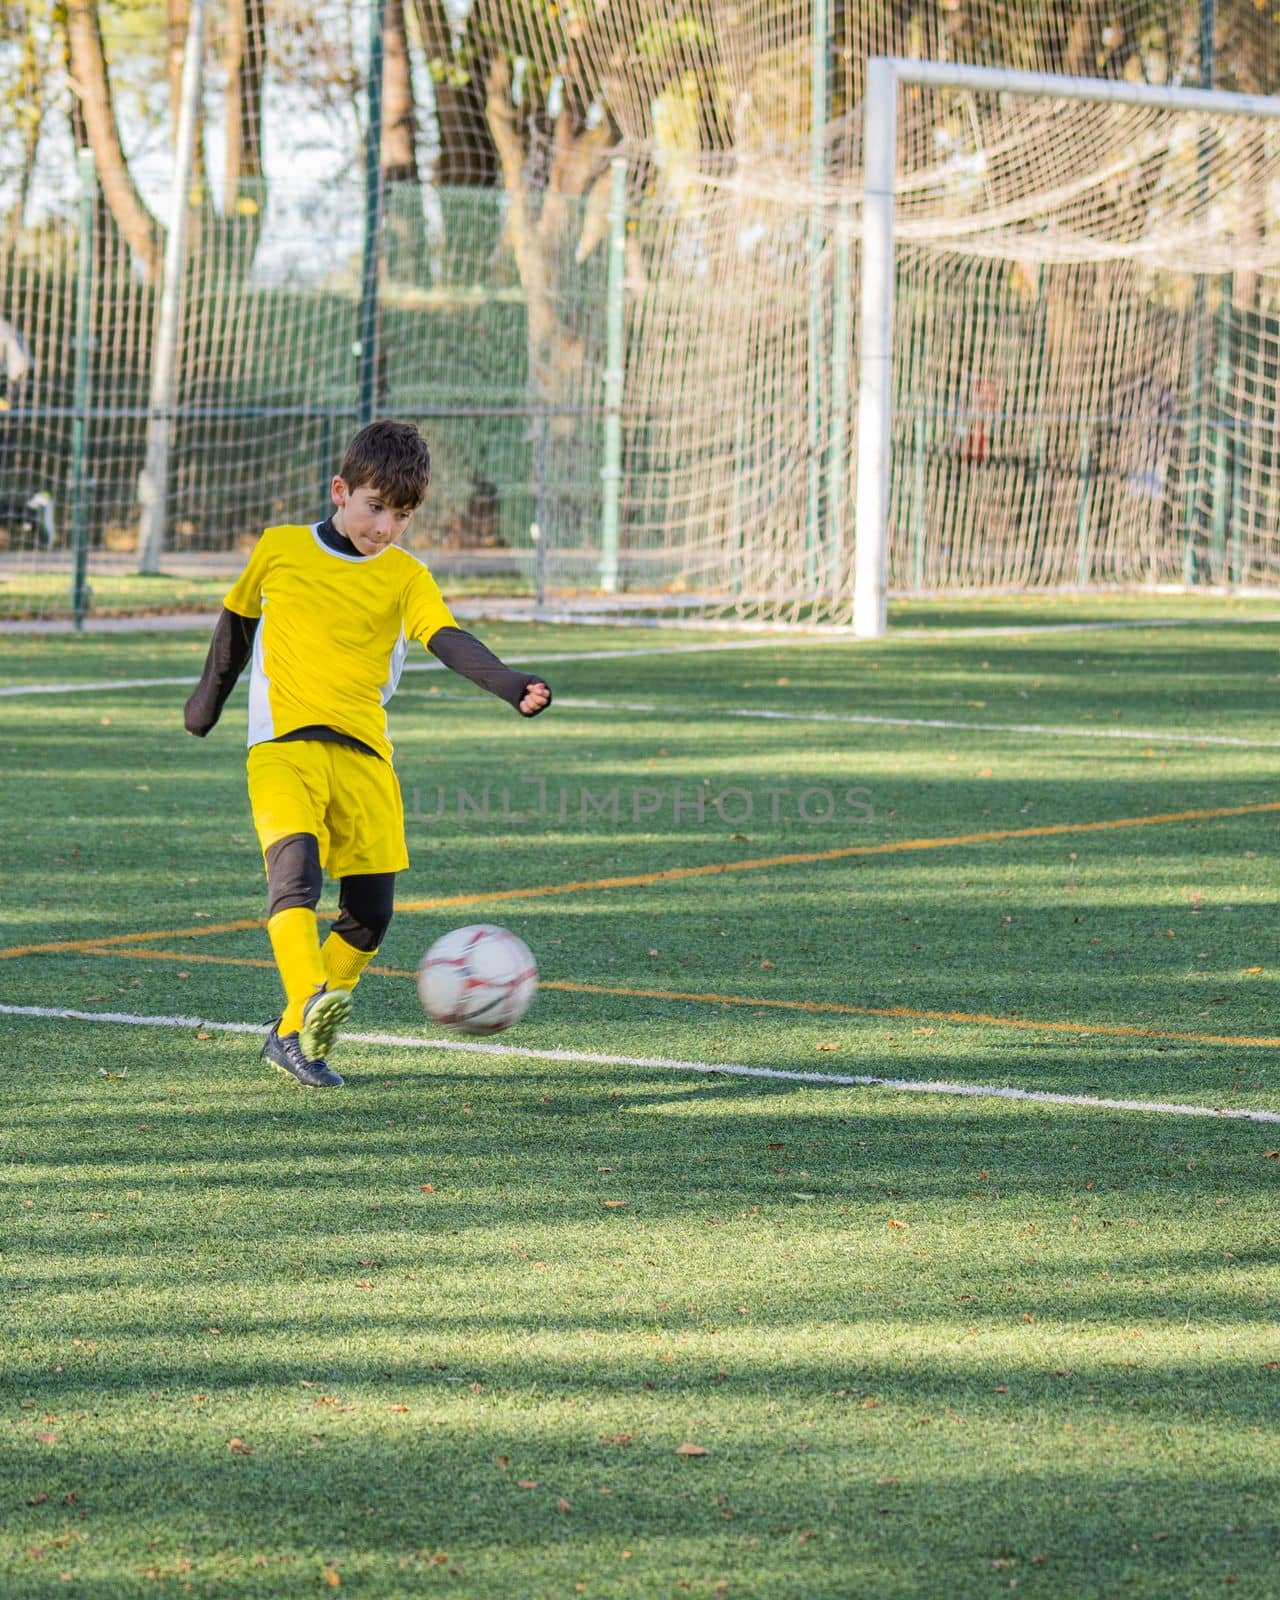 Football player in yellow uniform shooting the ball during a match.